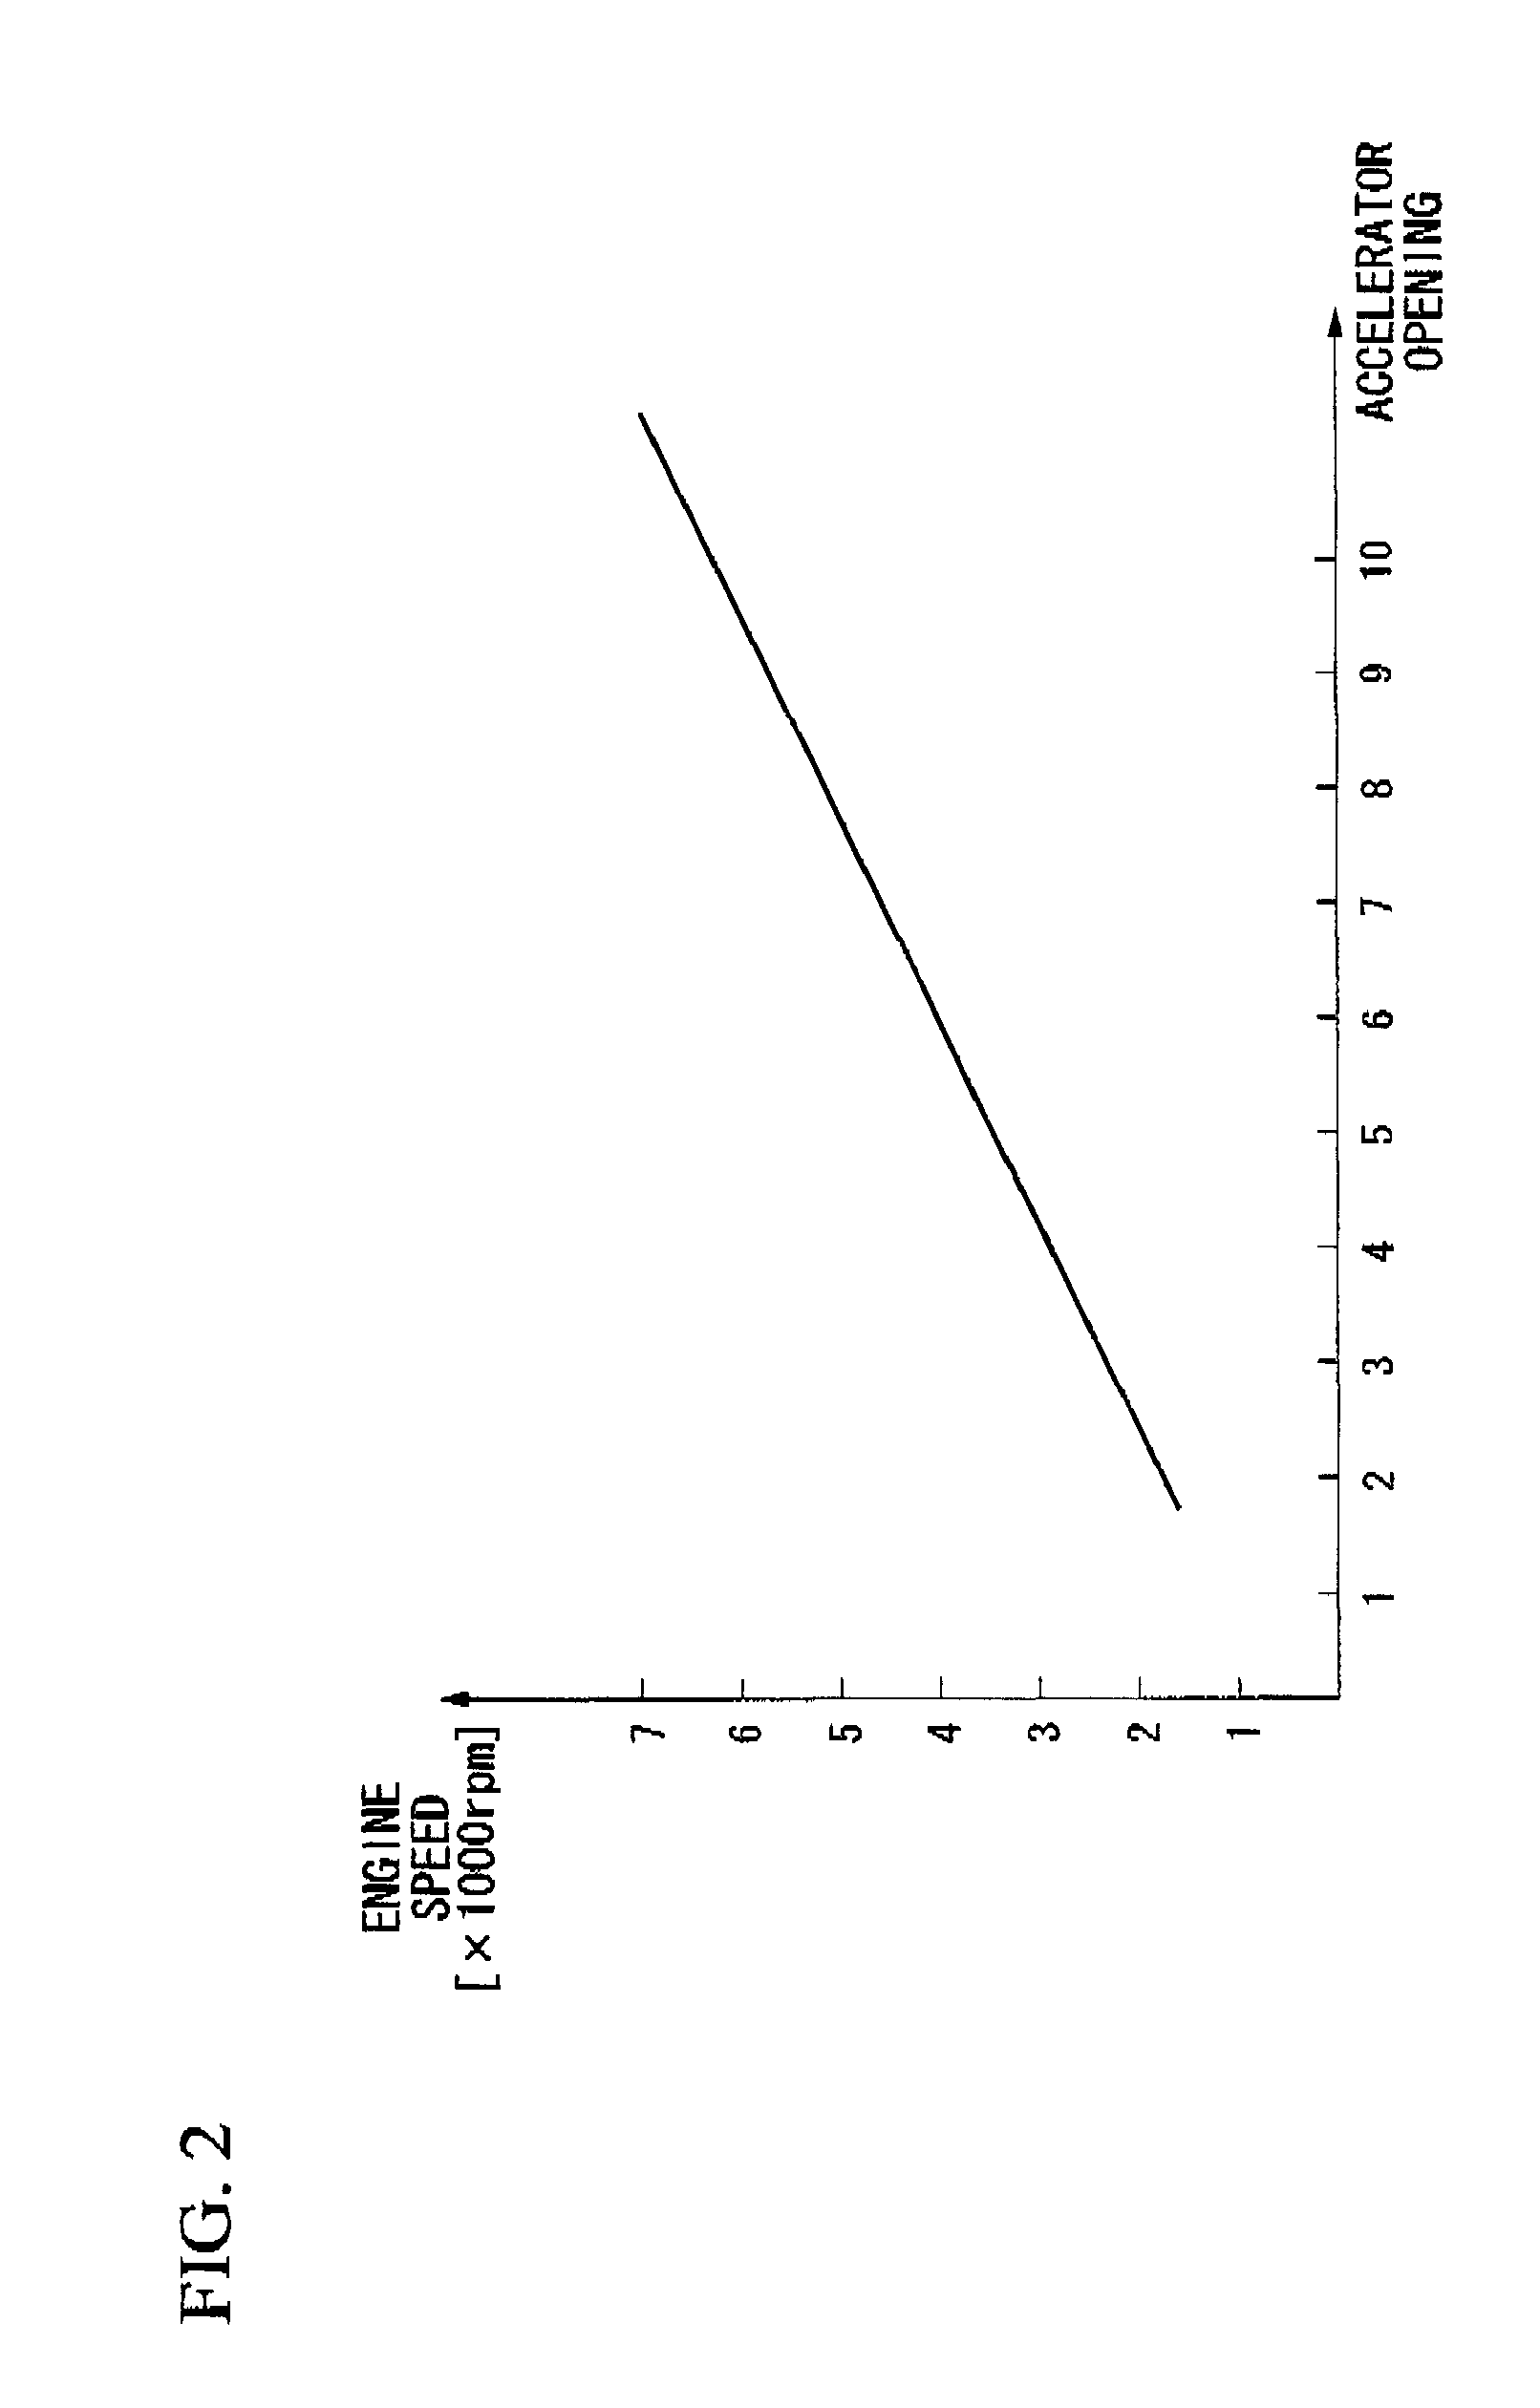 Engine speed calculation device and engine sound generation device